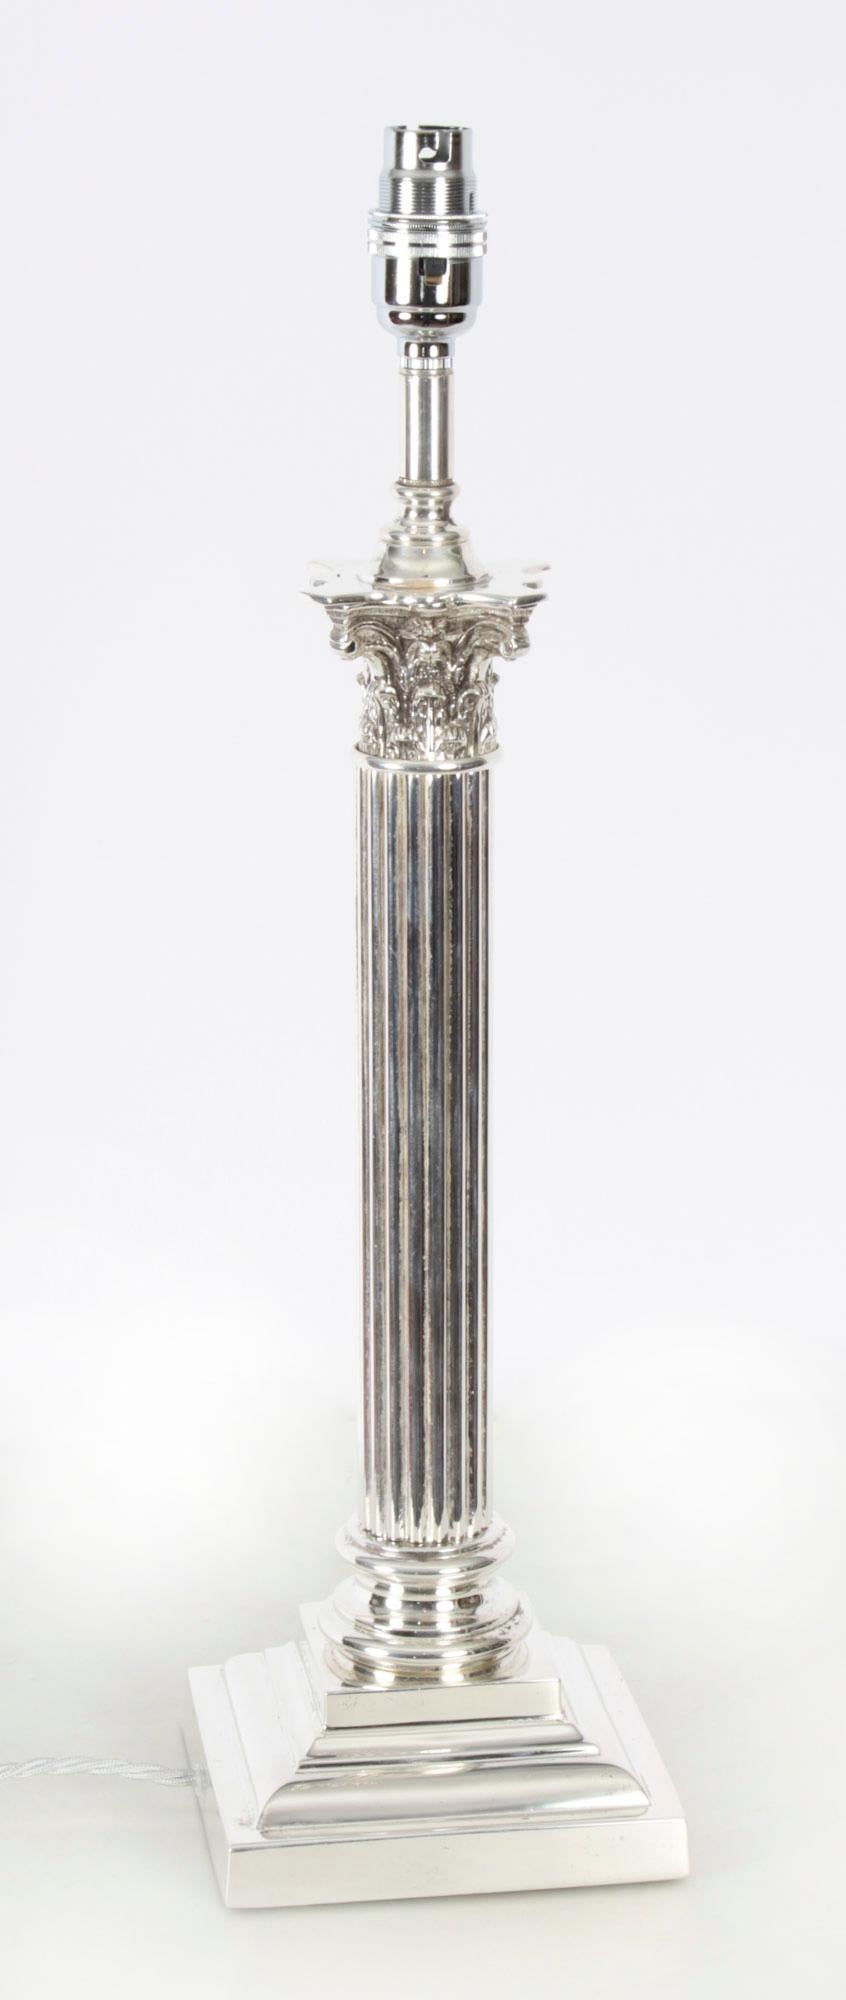 This is a splendid antique Victorian silver-plated Corinthian column table lamp now converted to electricity, late 19th century in date.
 
This opulent antique table lamp features a kingly Corinthian Capital decorated with classical ornate foliage